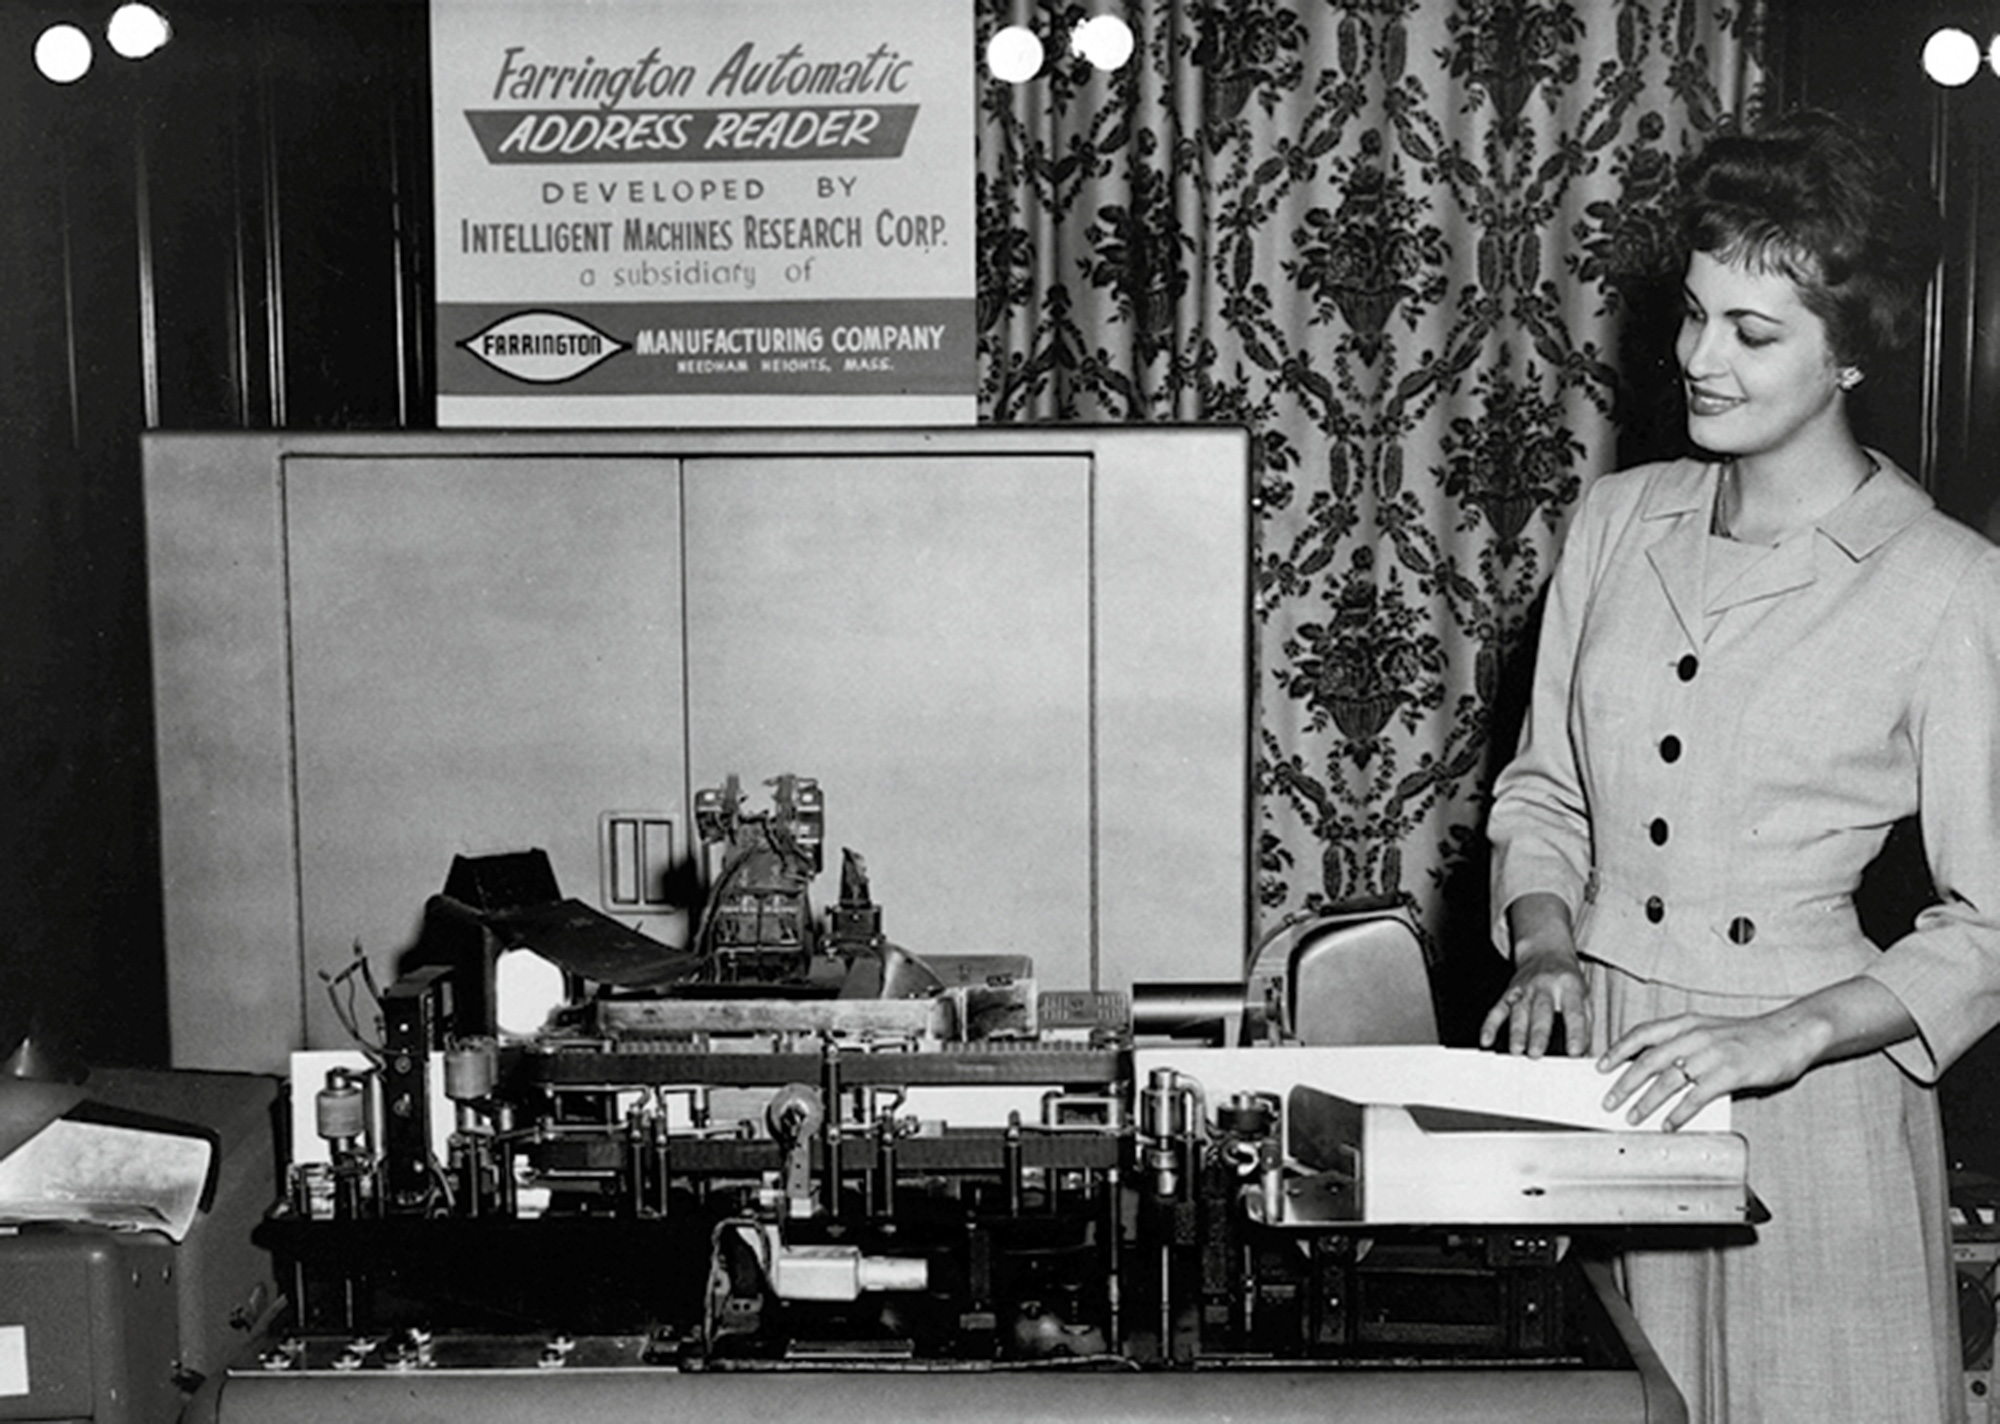 “A nineteen fifty-three photograph of a woman standing next to The Farrington Automatic, one of the first address-reading machines to be used by the Post Office Department.”